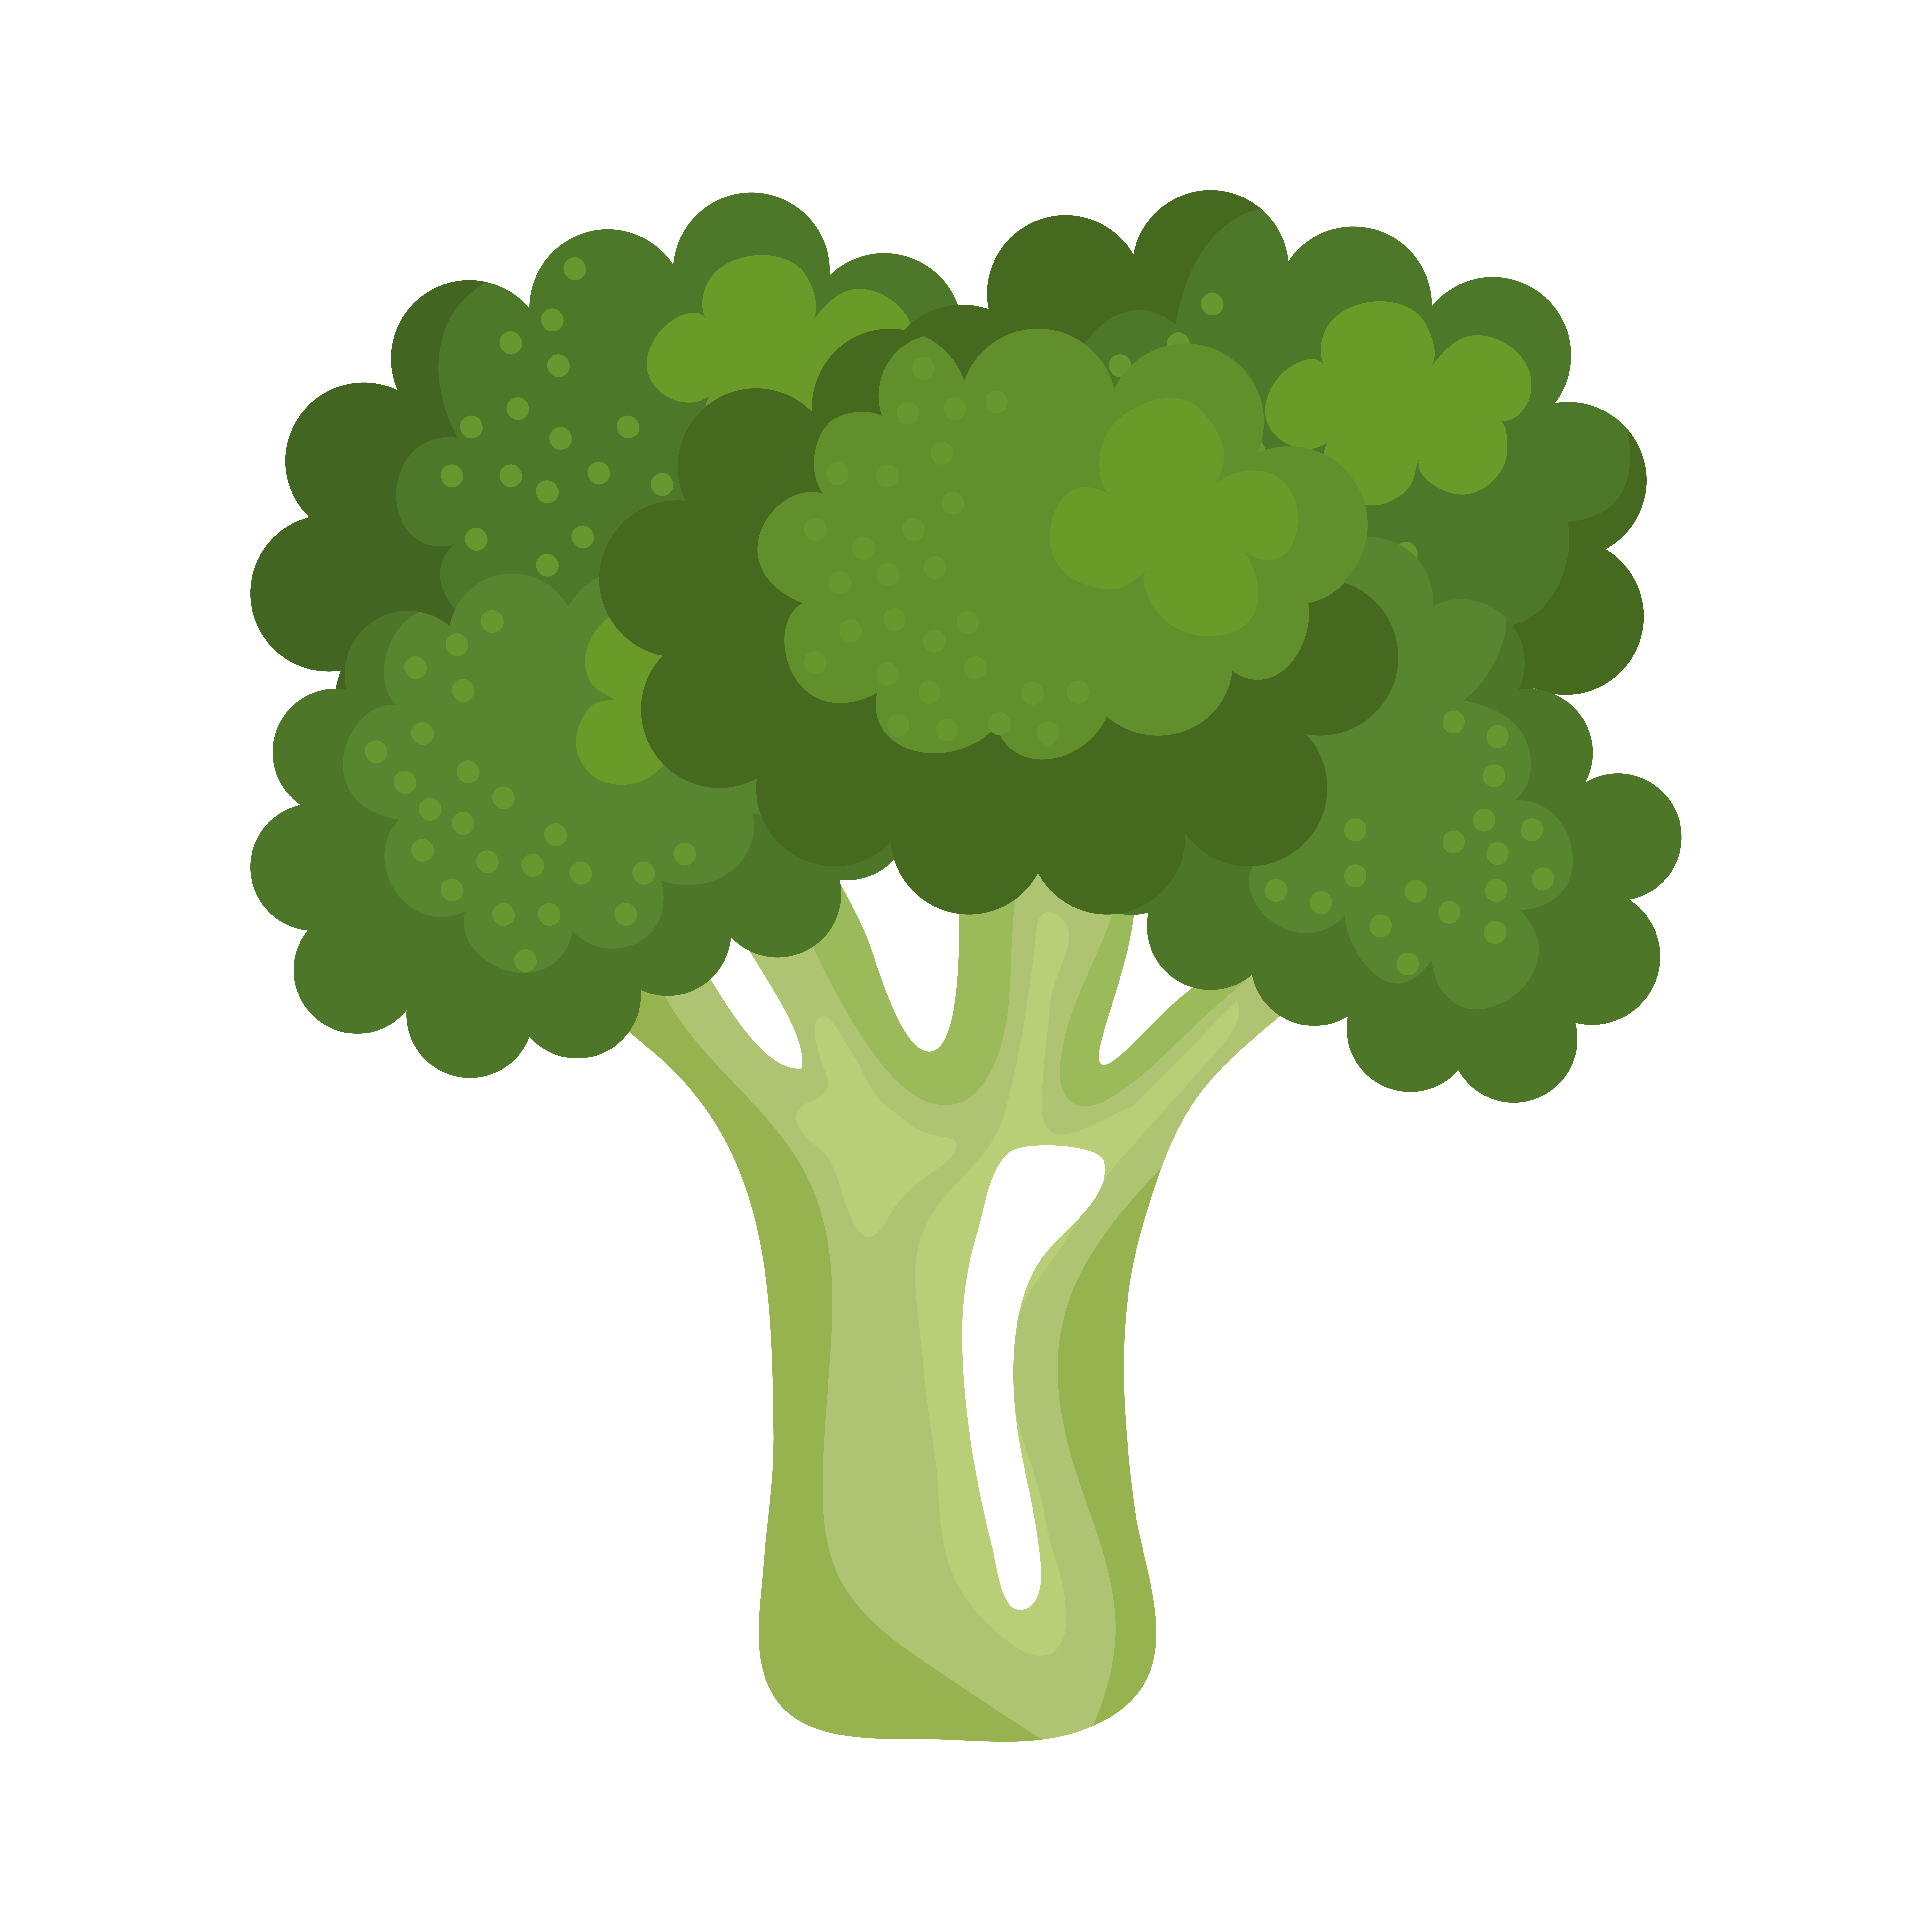 Broccoli Vector Art, Icons, and Graphics for Free Download